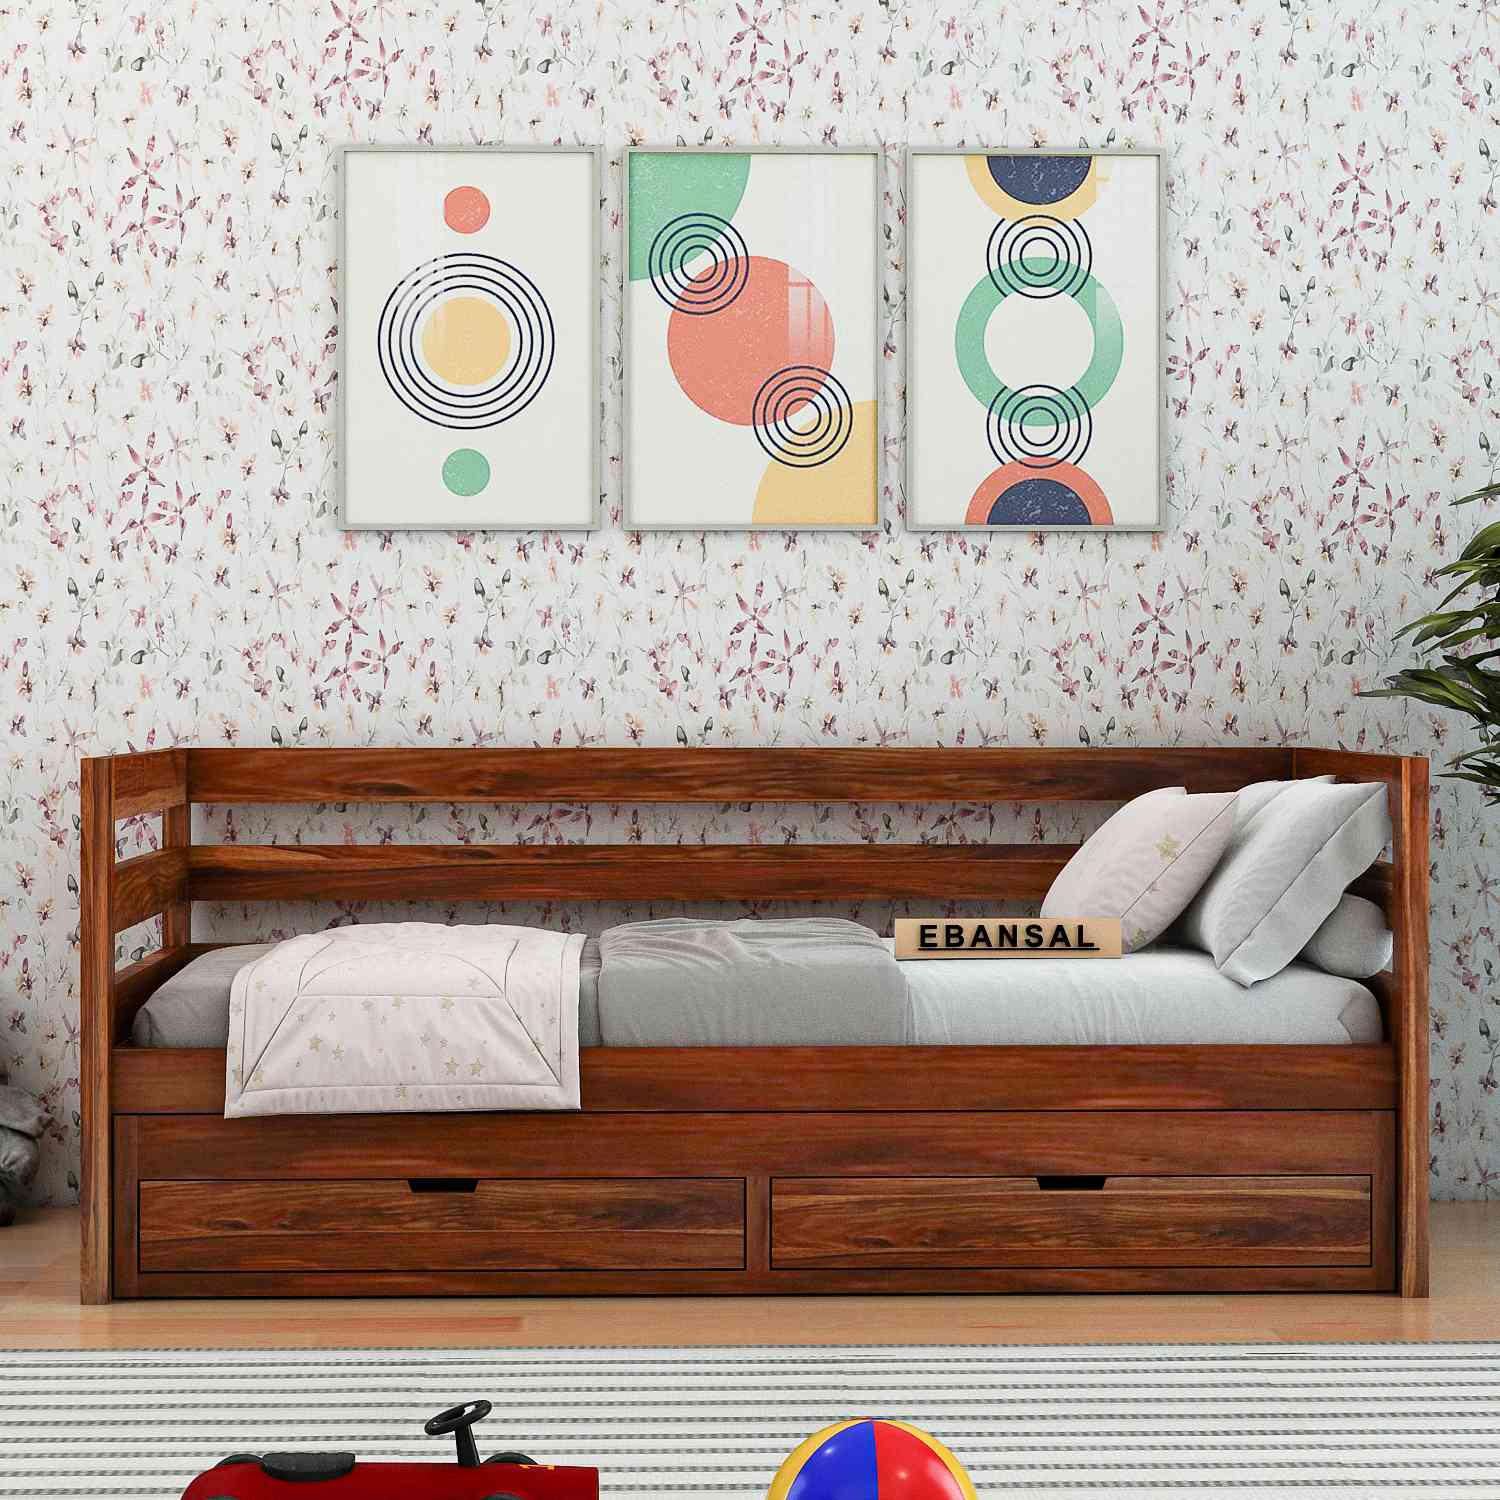 Feelinn Solid Sheesham Wood Trundle Bed For Kids (Without Mattress, Natural Finish)